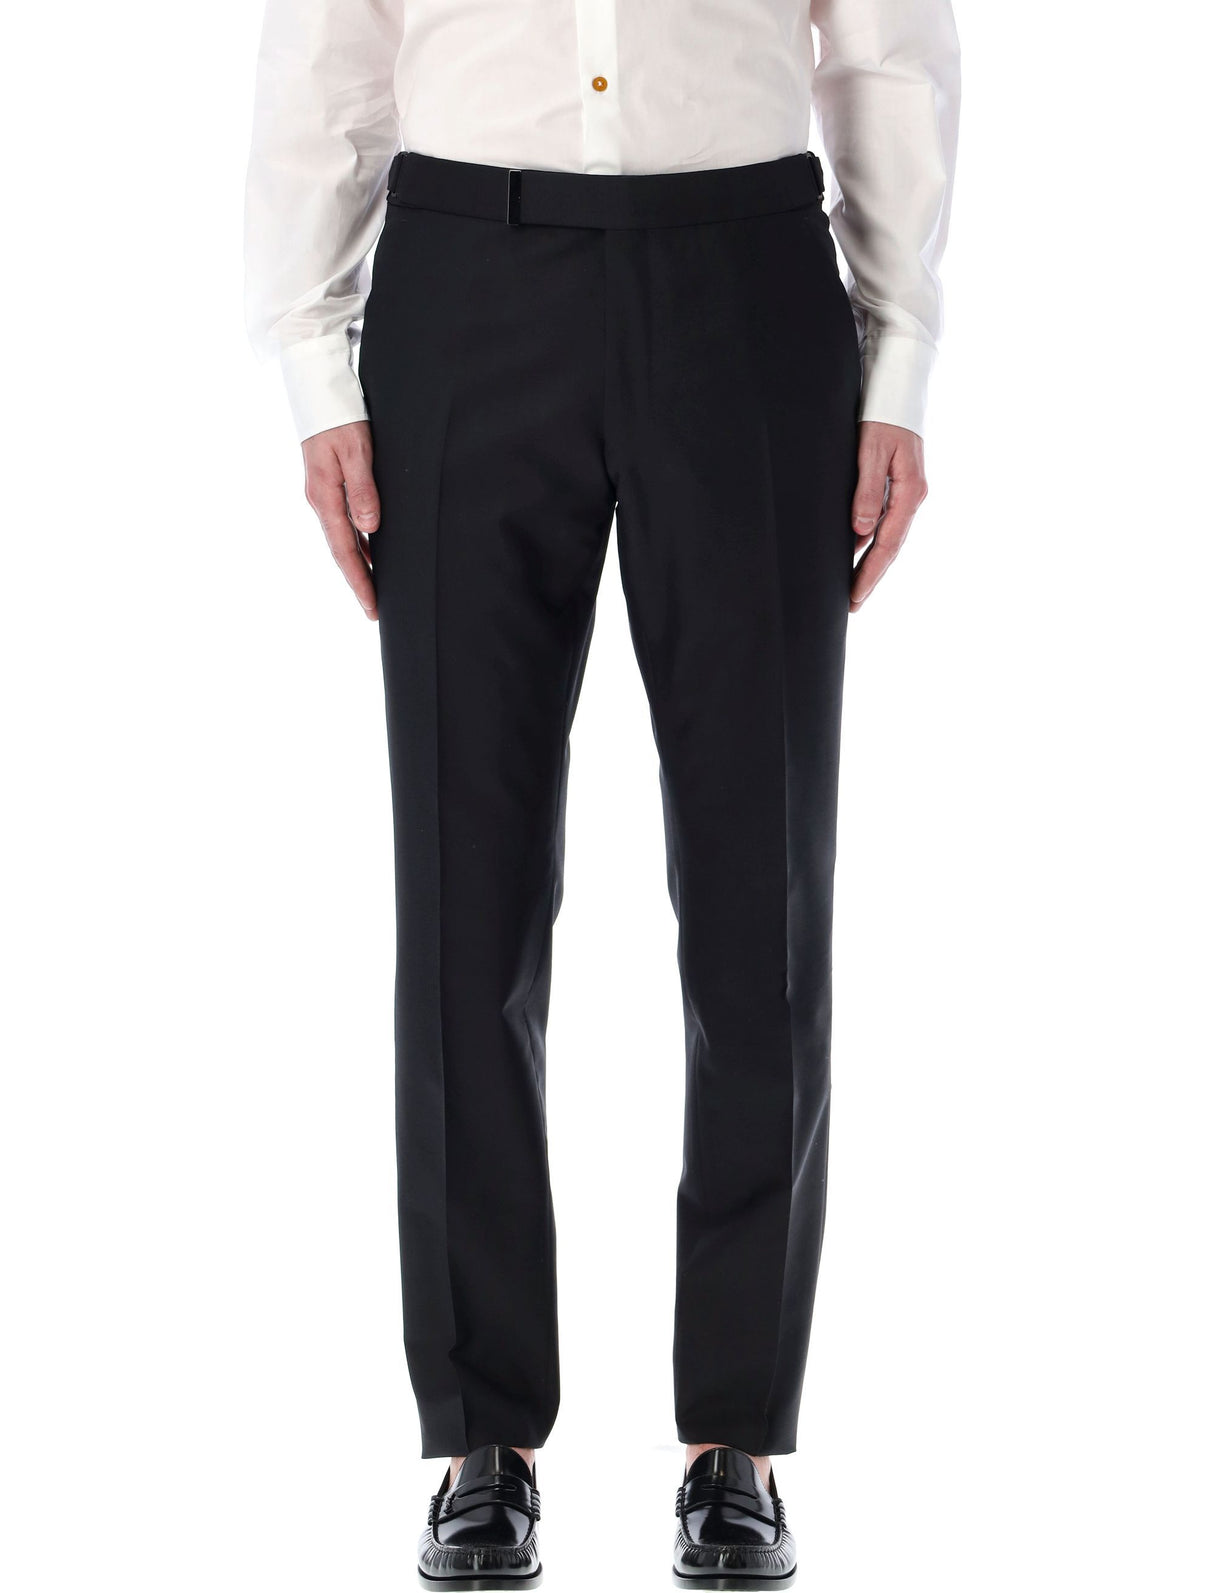 TOM FORD Tailored Trousers for Men - Wool-Silk Blend, Mid-Rise Waist, Concealed Closure and More